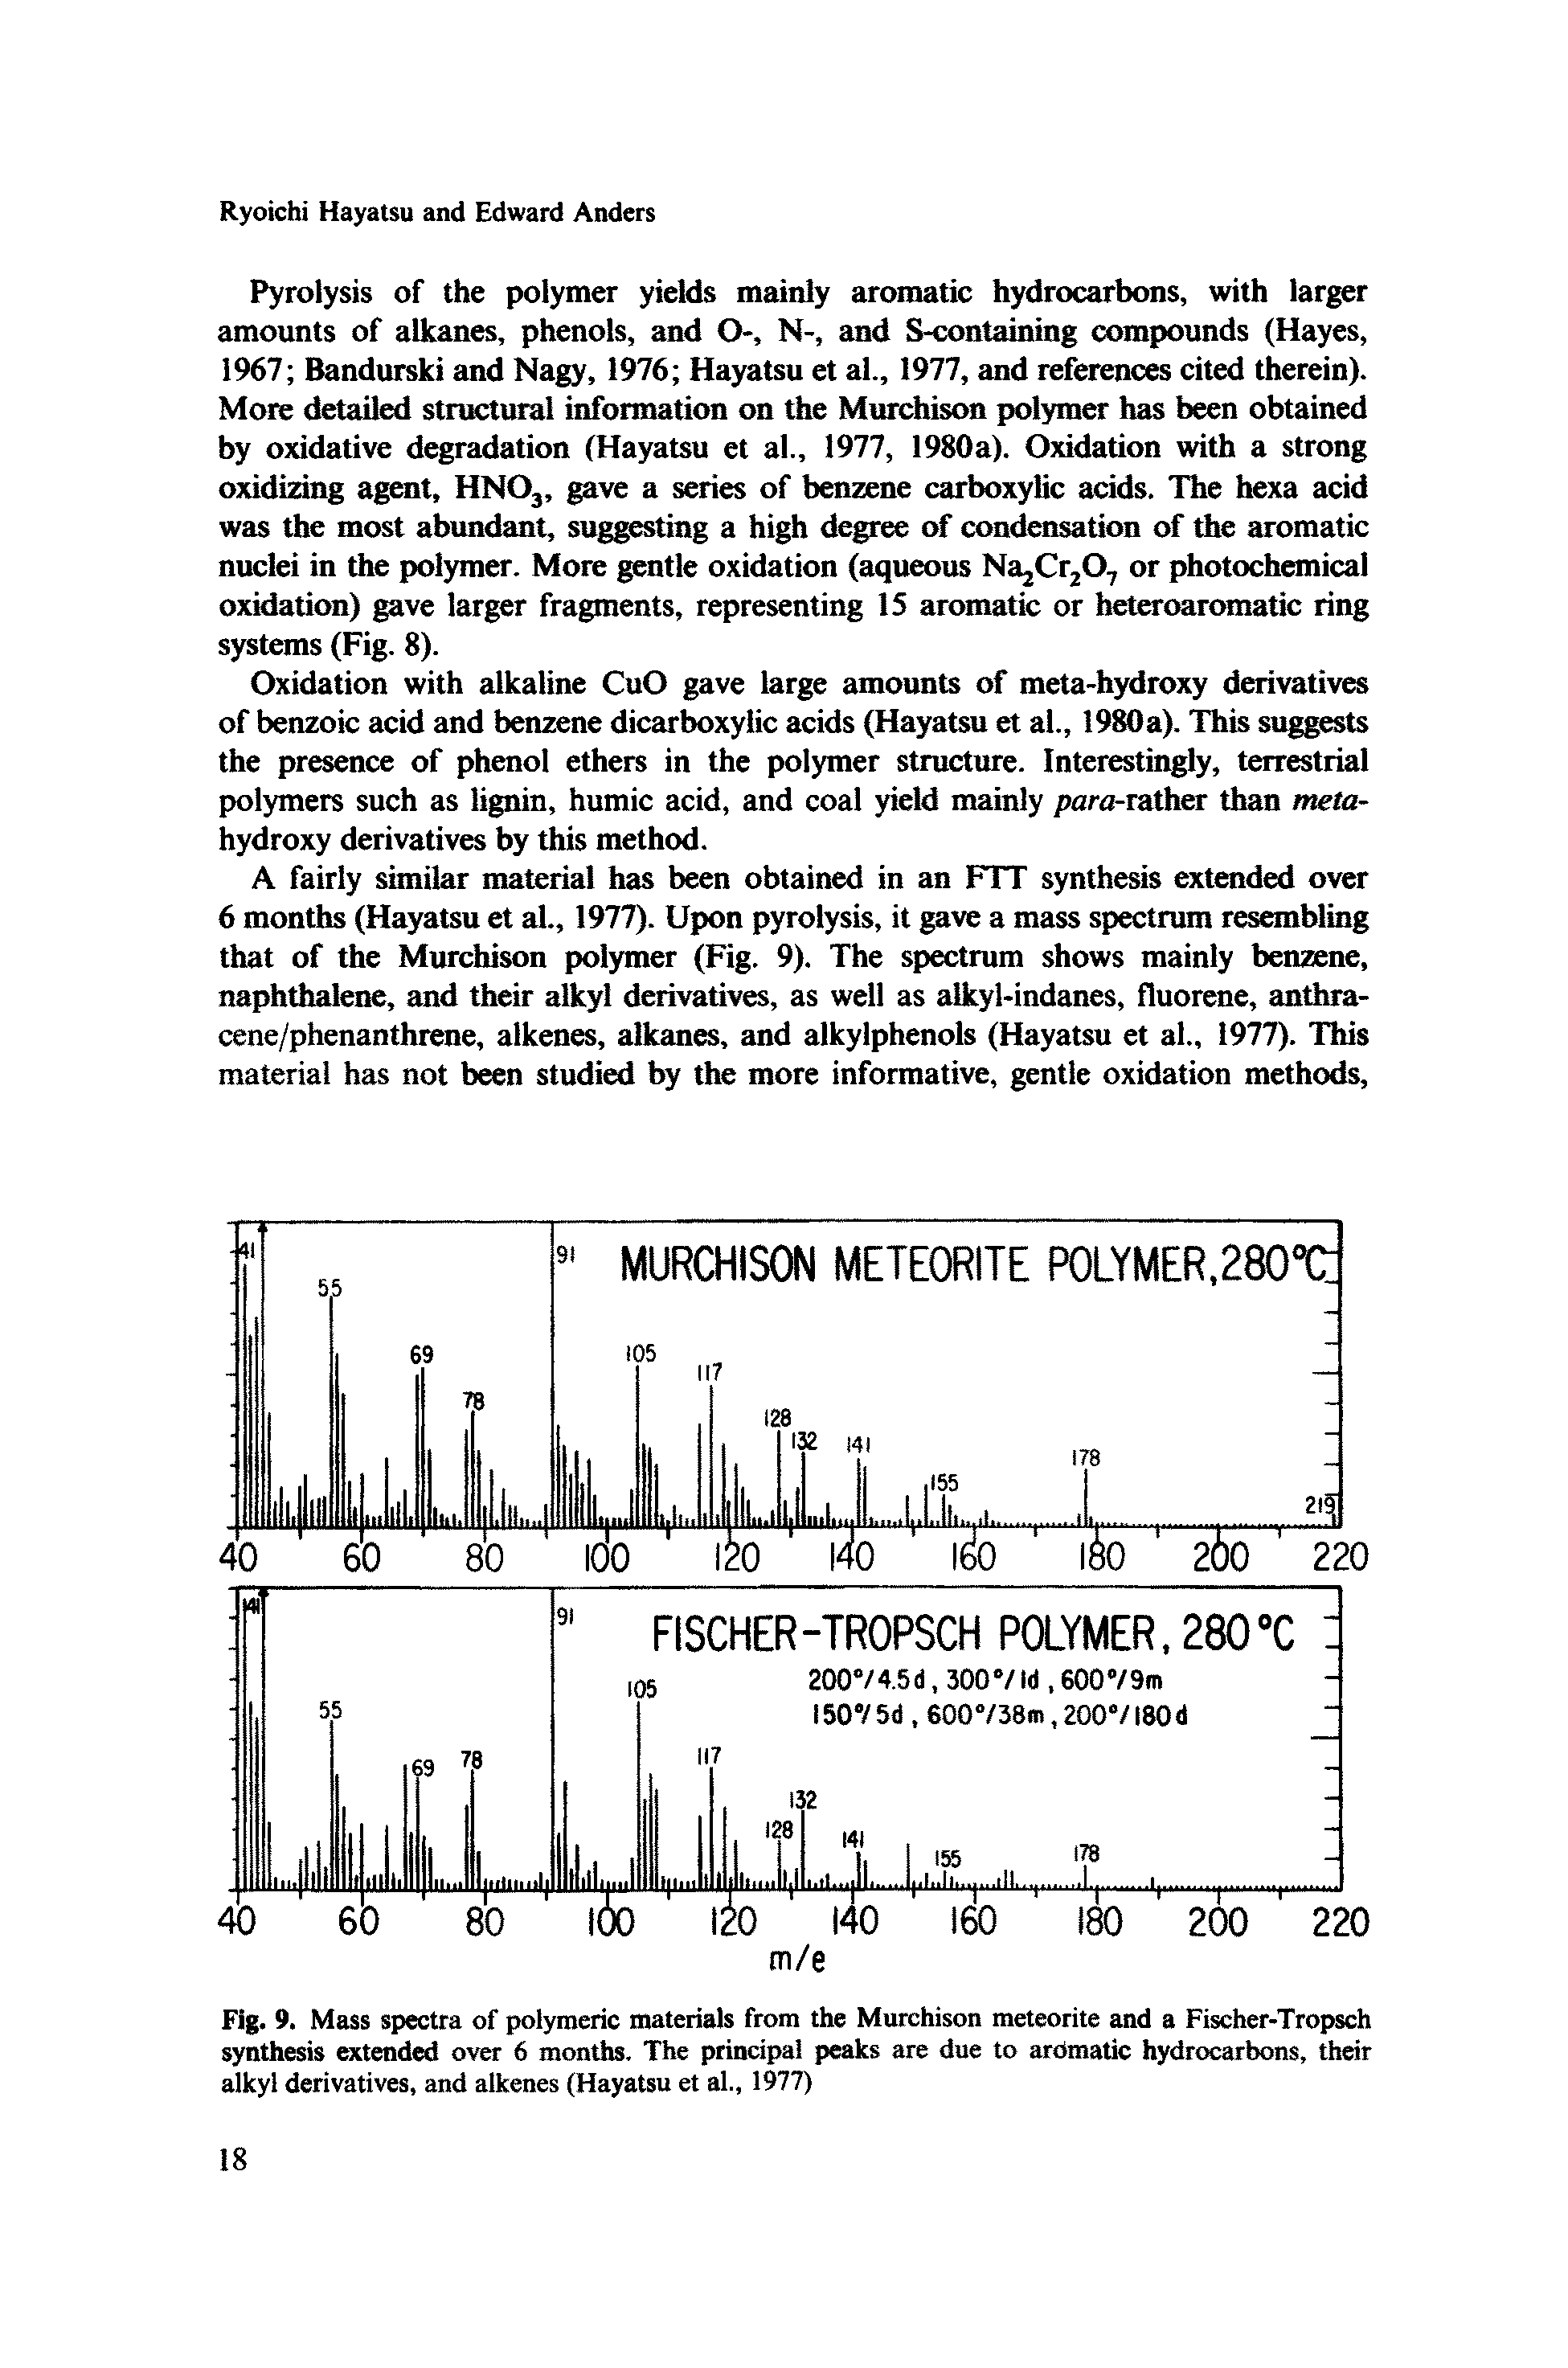 Fig. 9. Mass spectra of polymeric materials from the Murchison meteorite and a Fischer-Tropsch synthesis extended over 6 months. The principal peaks are due to ardmatic hydrocarbons, their alkyl derivatives, and alkenes (Hayatsu et al., 1977)...